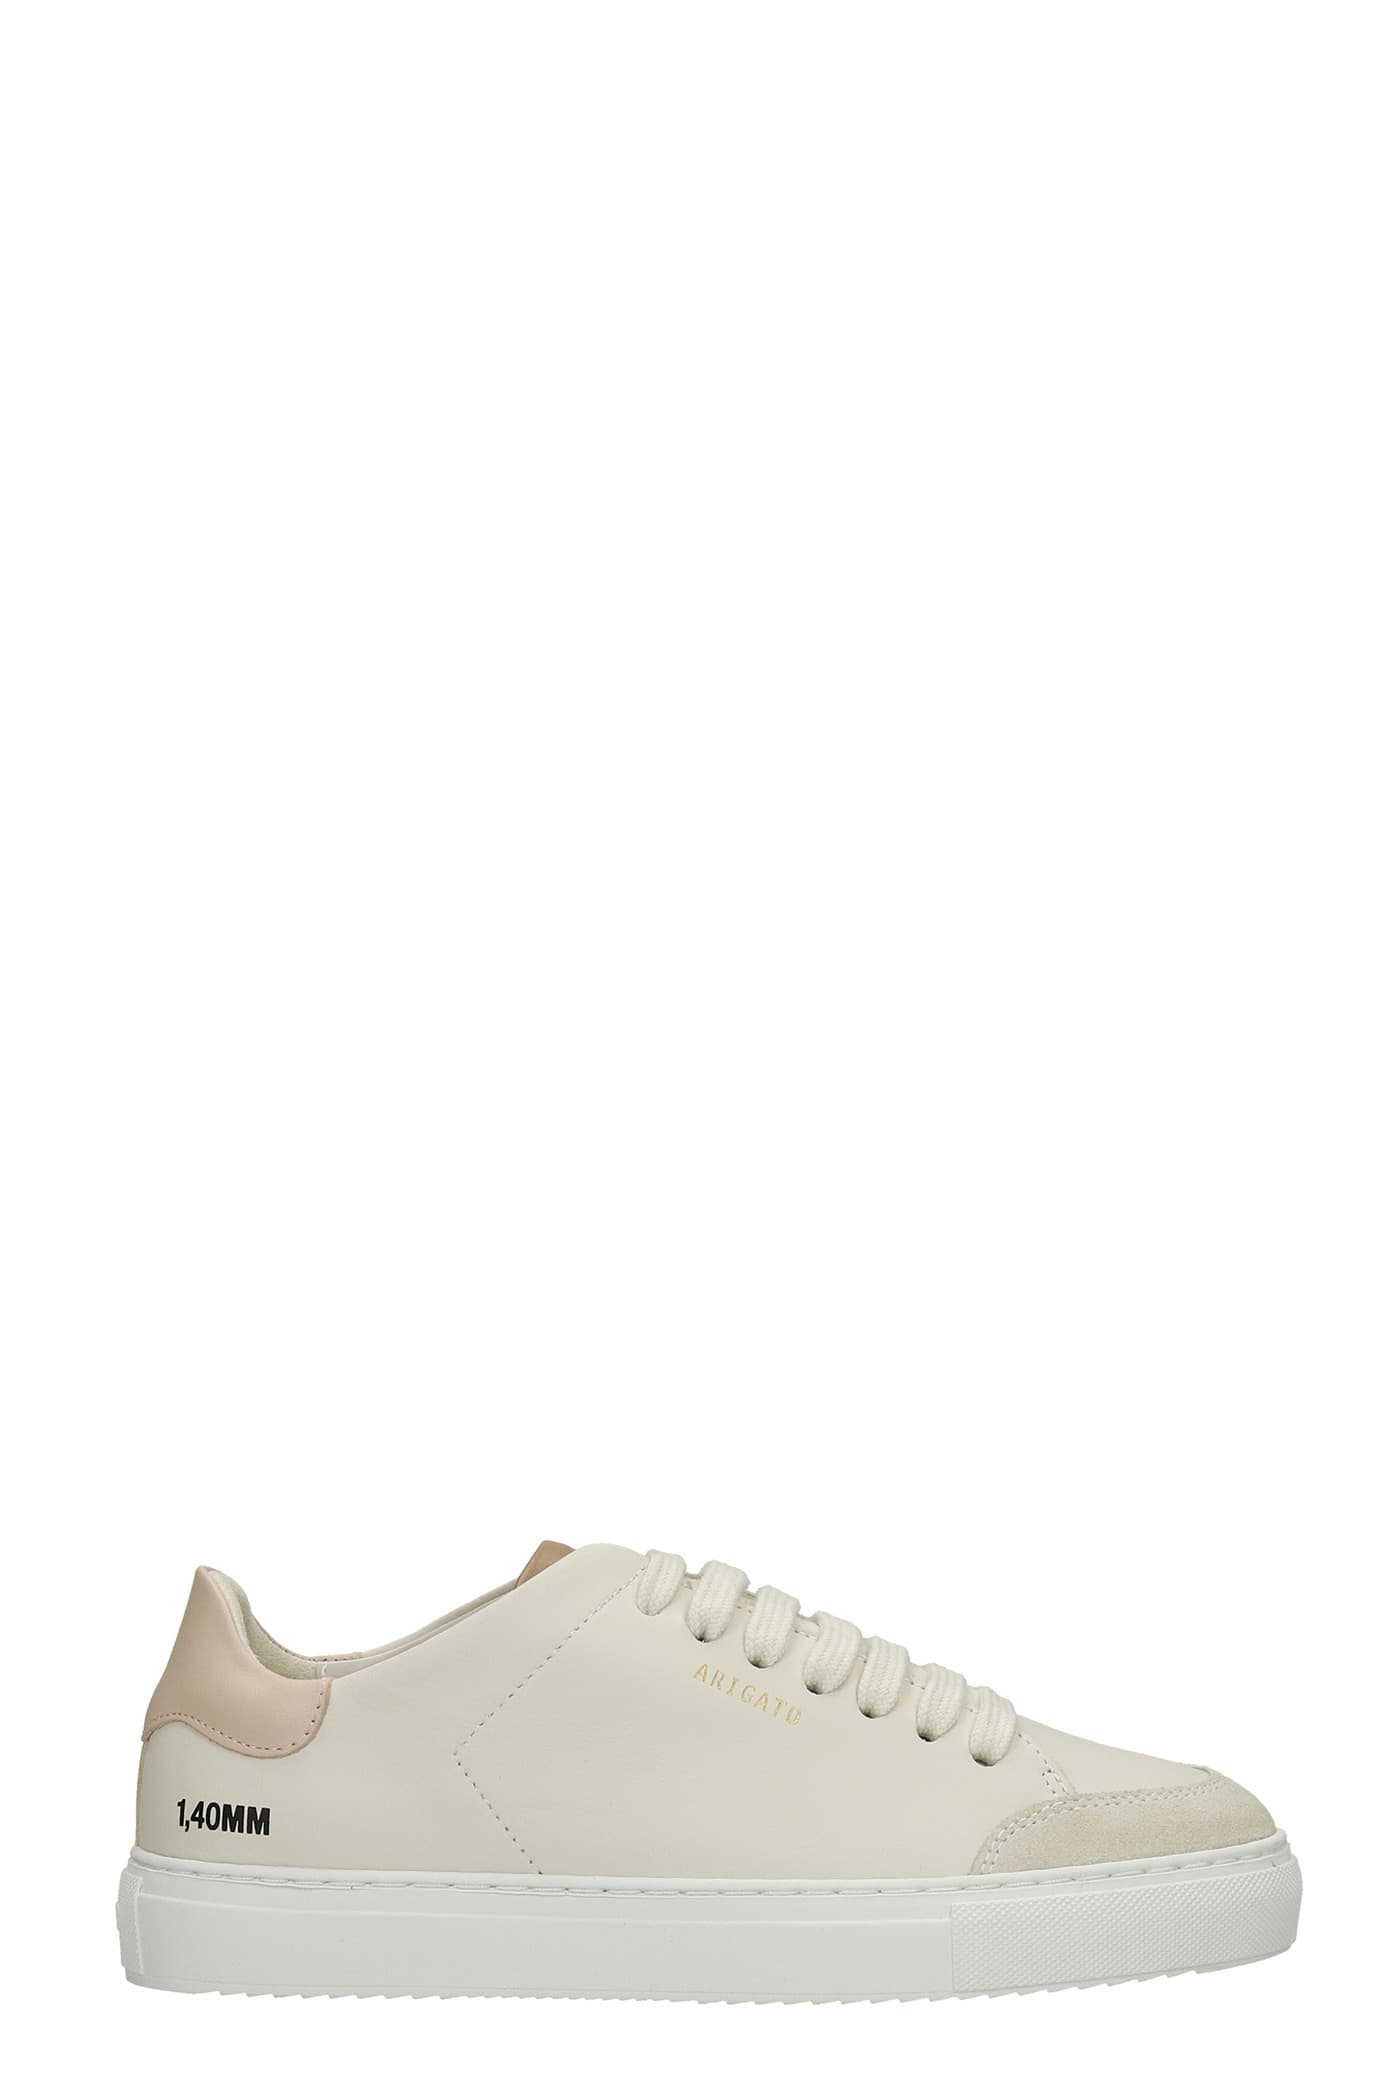 Axel Arigato Clean 90 Sneakers In Beige Suede And Leather